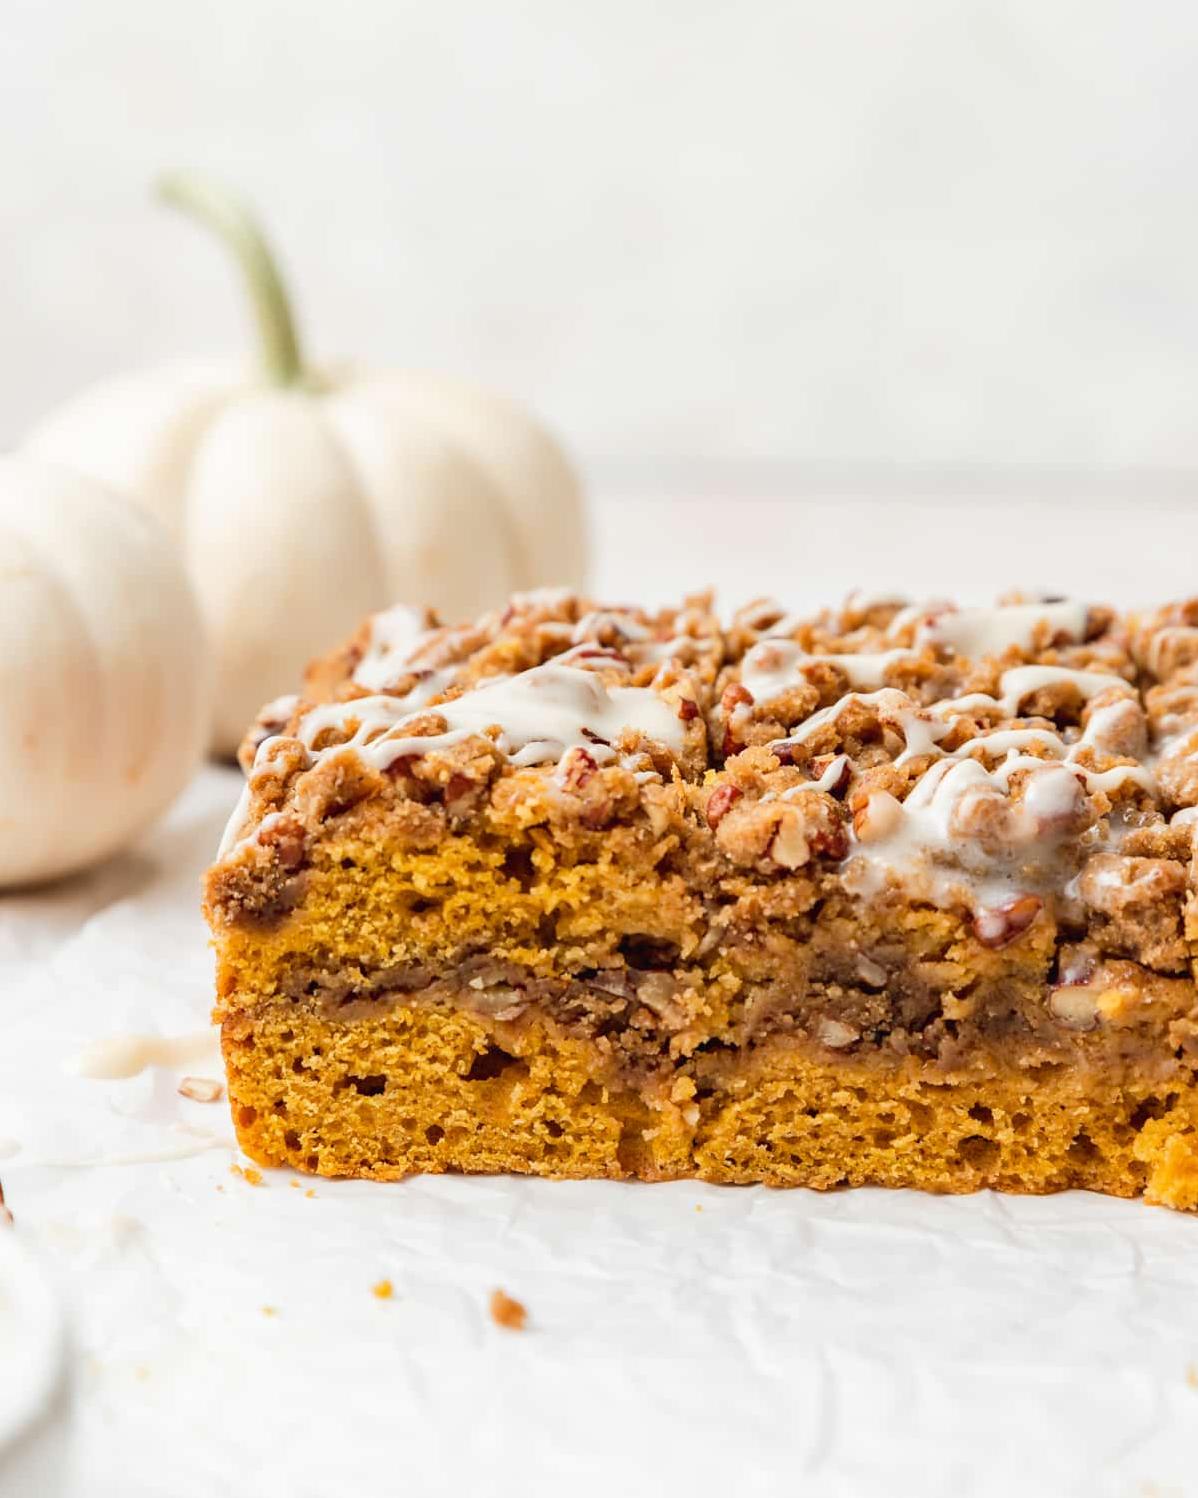  Satisfy your pumpkin spice cravings with a slice of this delicious coffee cake.